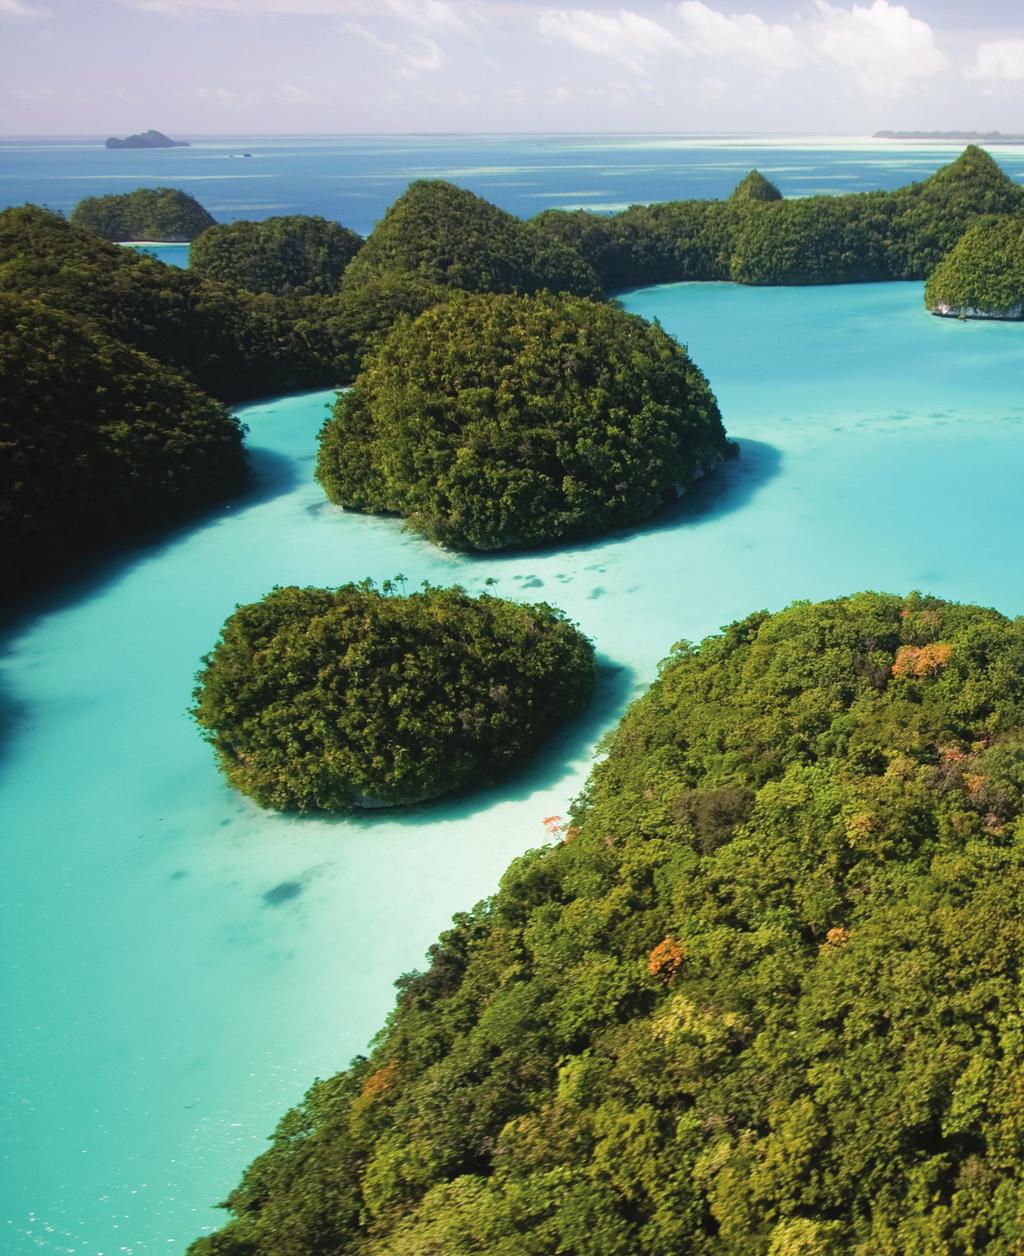 Palau, an archipelago made up of more than 250 islands in the western